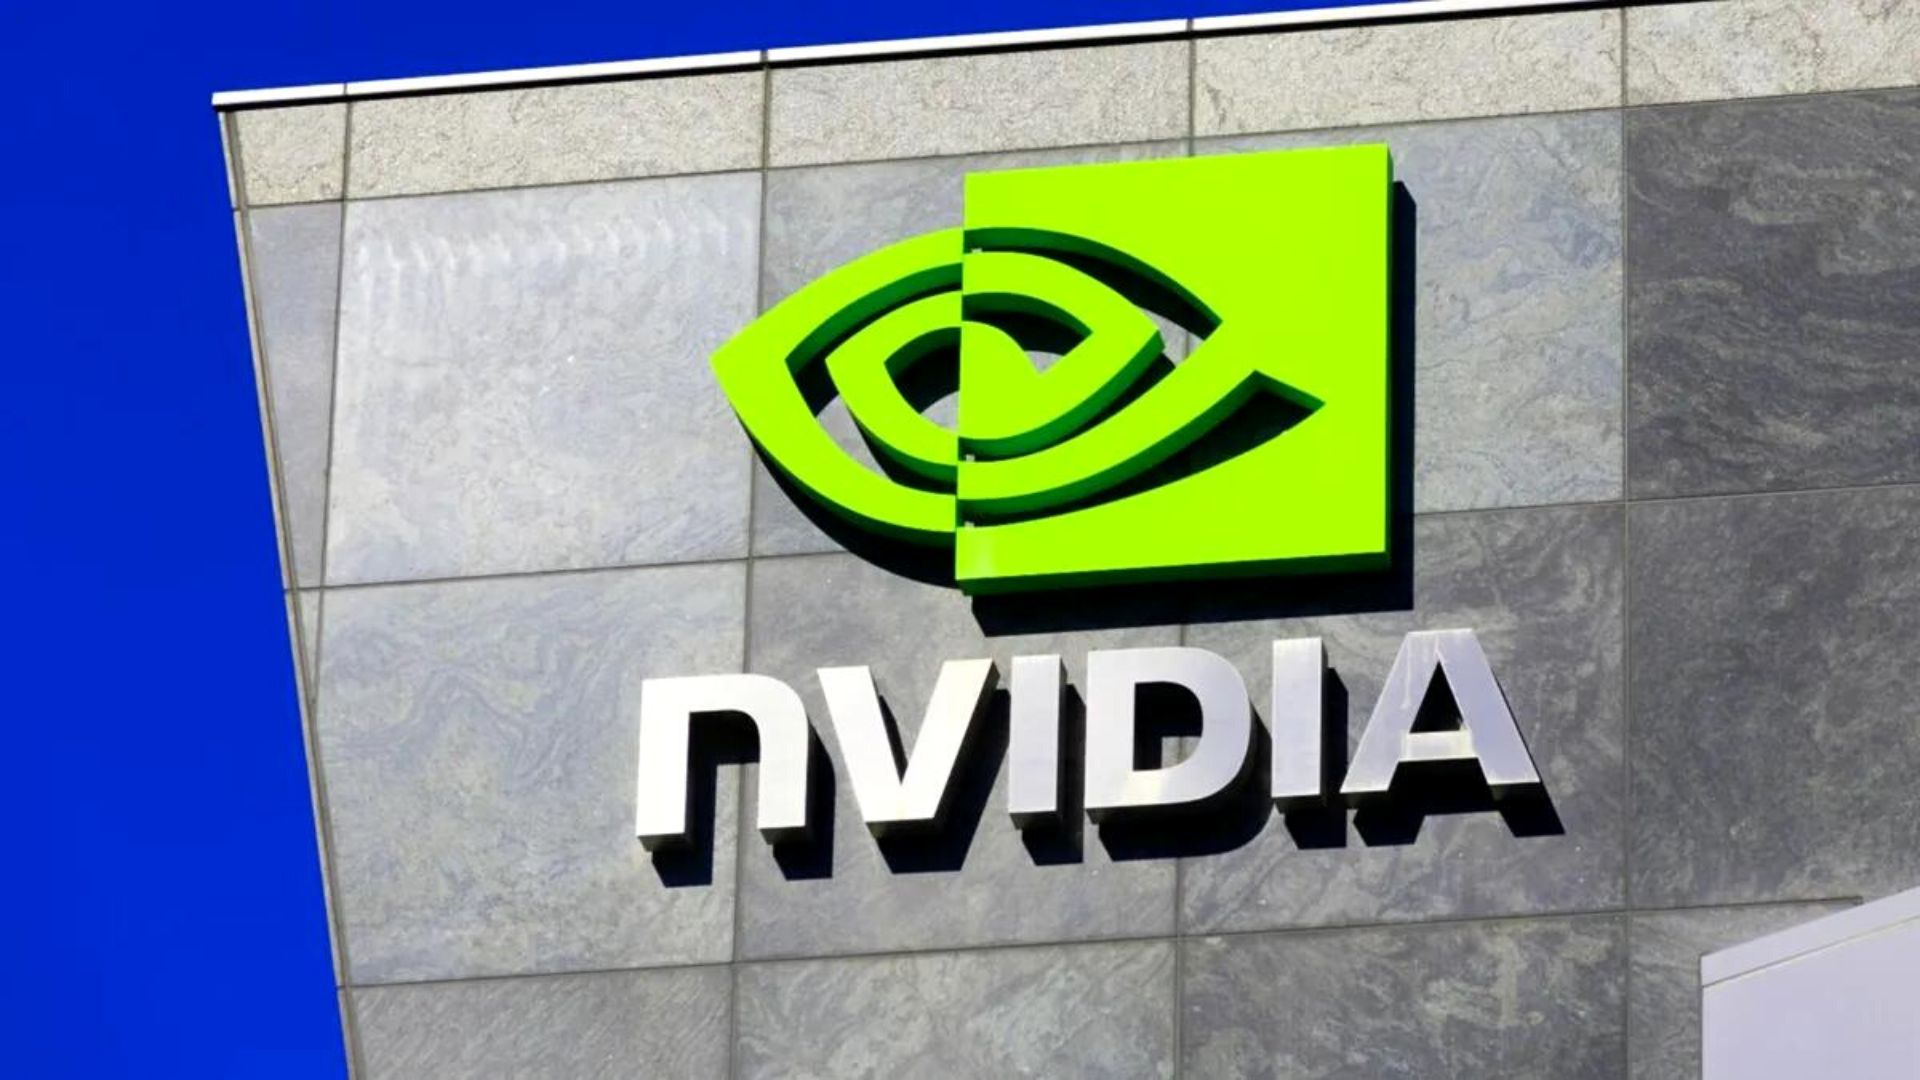 Reading Patent Portfolios With AI-powered Patent Summary: Nvidia’s Patent Portfolio: Fueling the AI Revolution and Driving Market Success